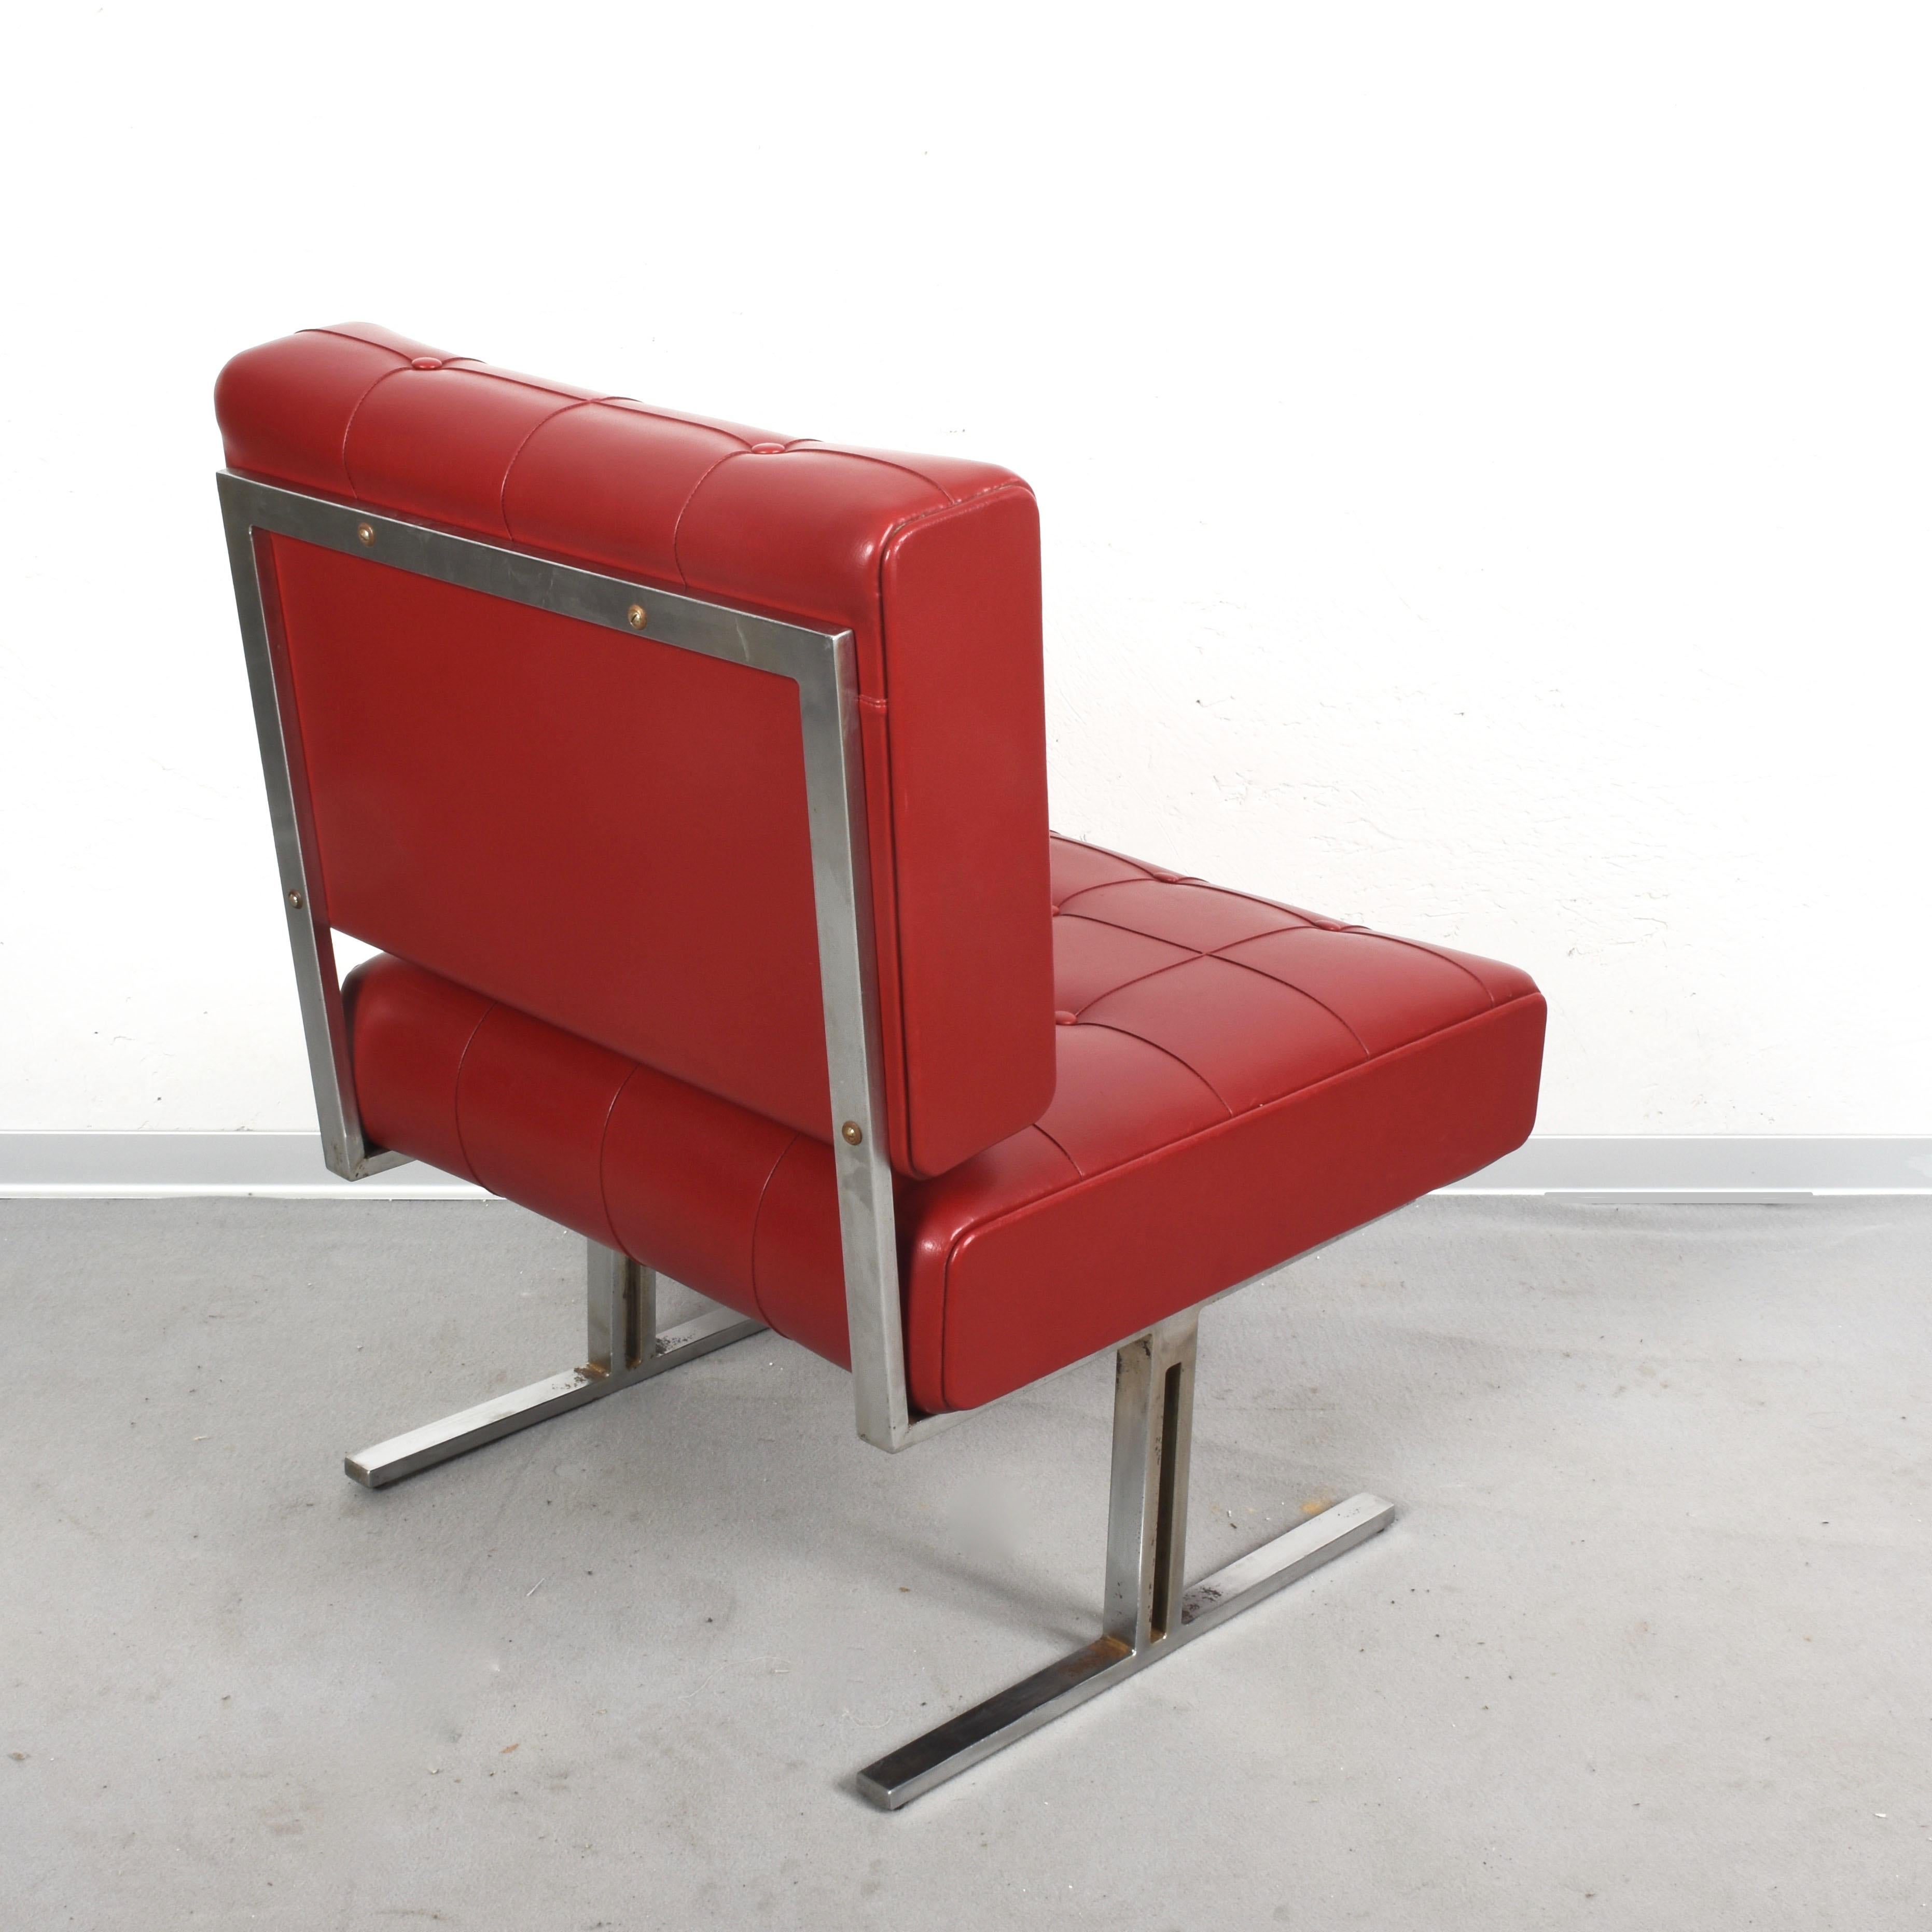 Pair of Steel Armchairs Skay Capitonne Red, Style Hausmann De Sede Italy 1950s For Sale 2